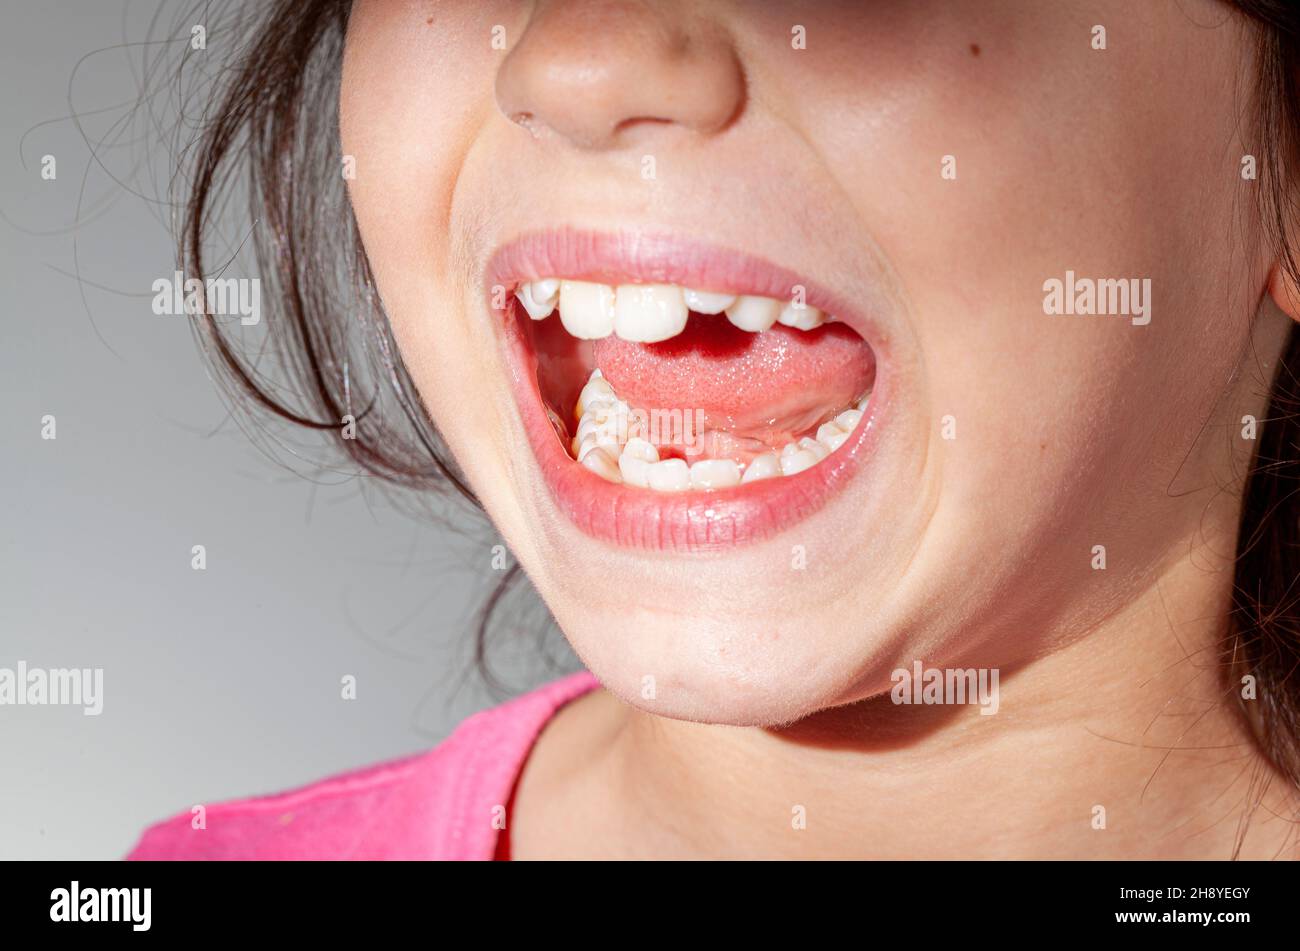 A caucasian girl with teeth crowding is showing the inside of her mouth in a dentist exam room. One of the front incisors are misaligned causing probl Stock Photo